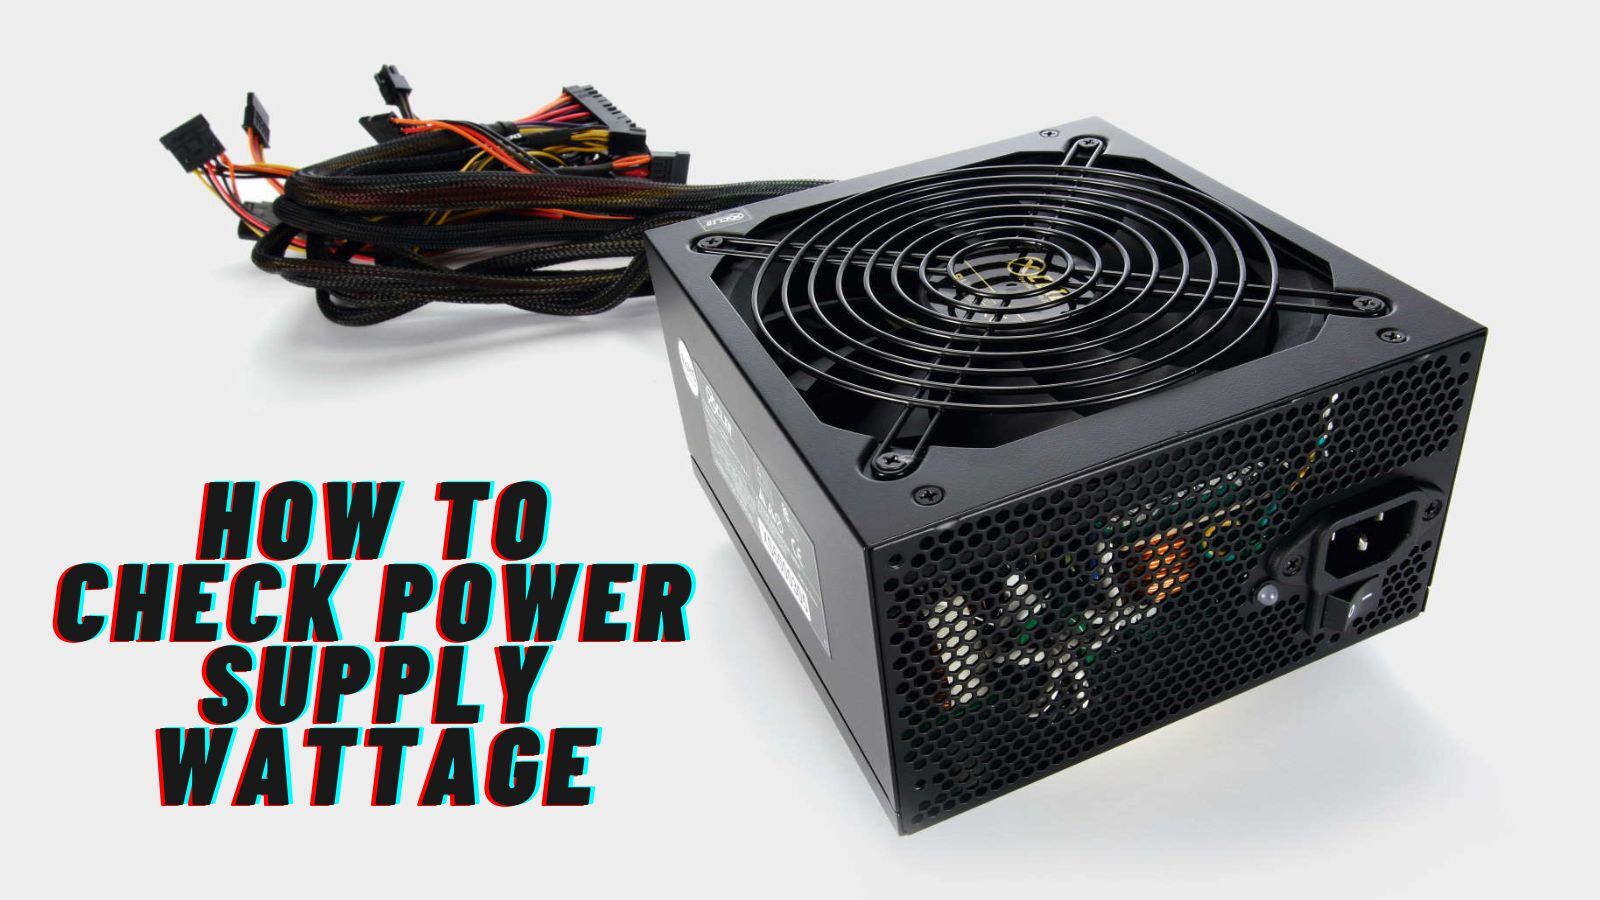 How to Check Power Supply Wattage on a PC